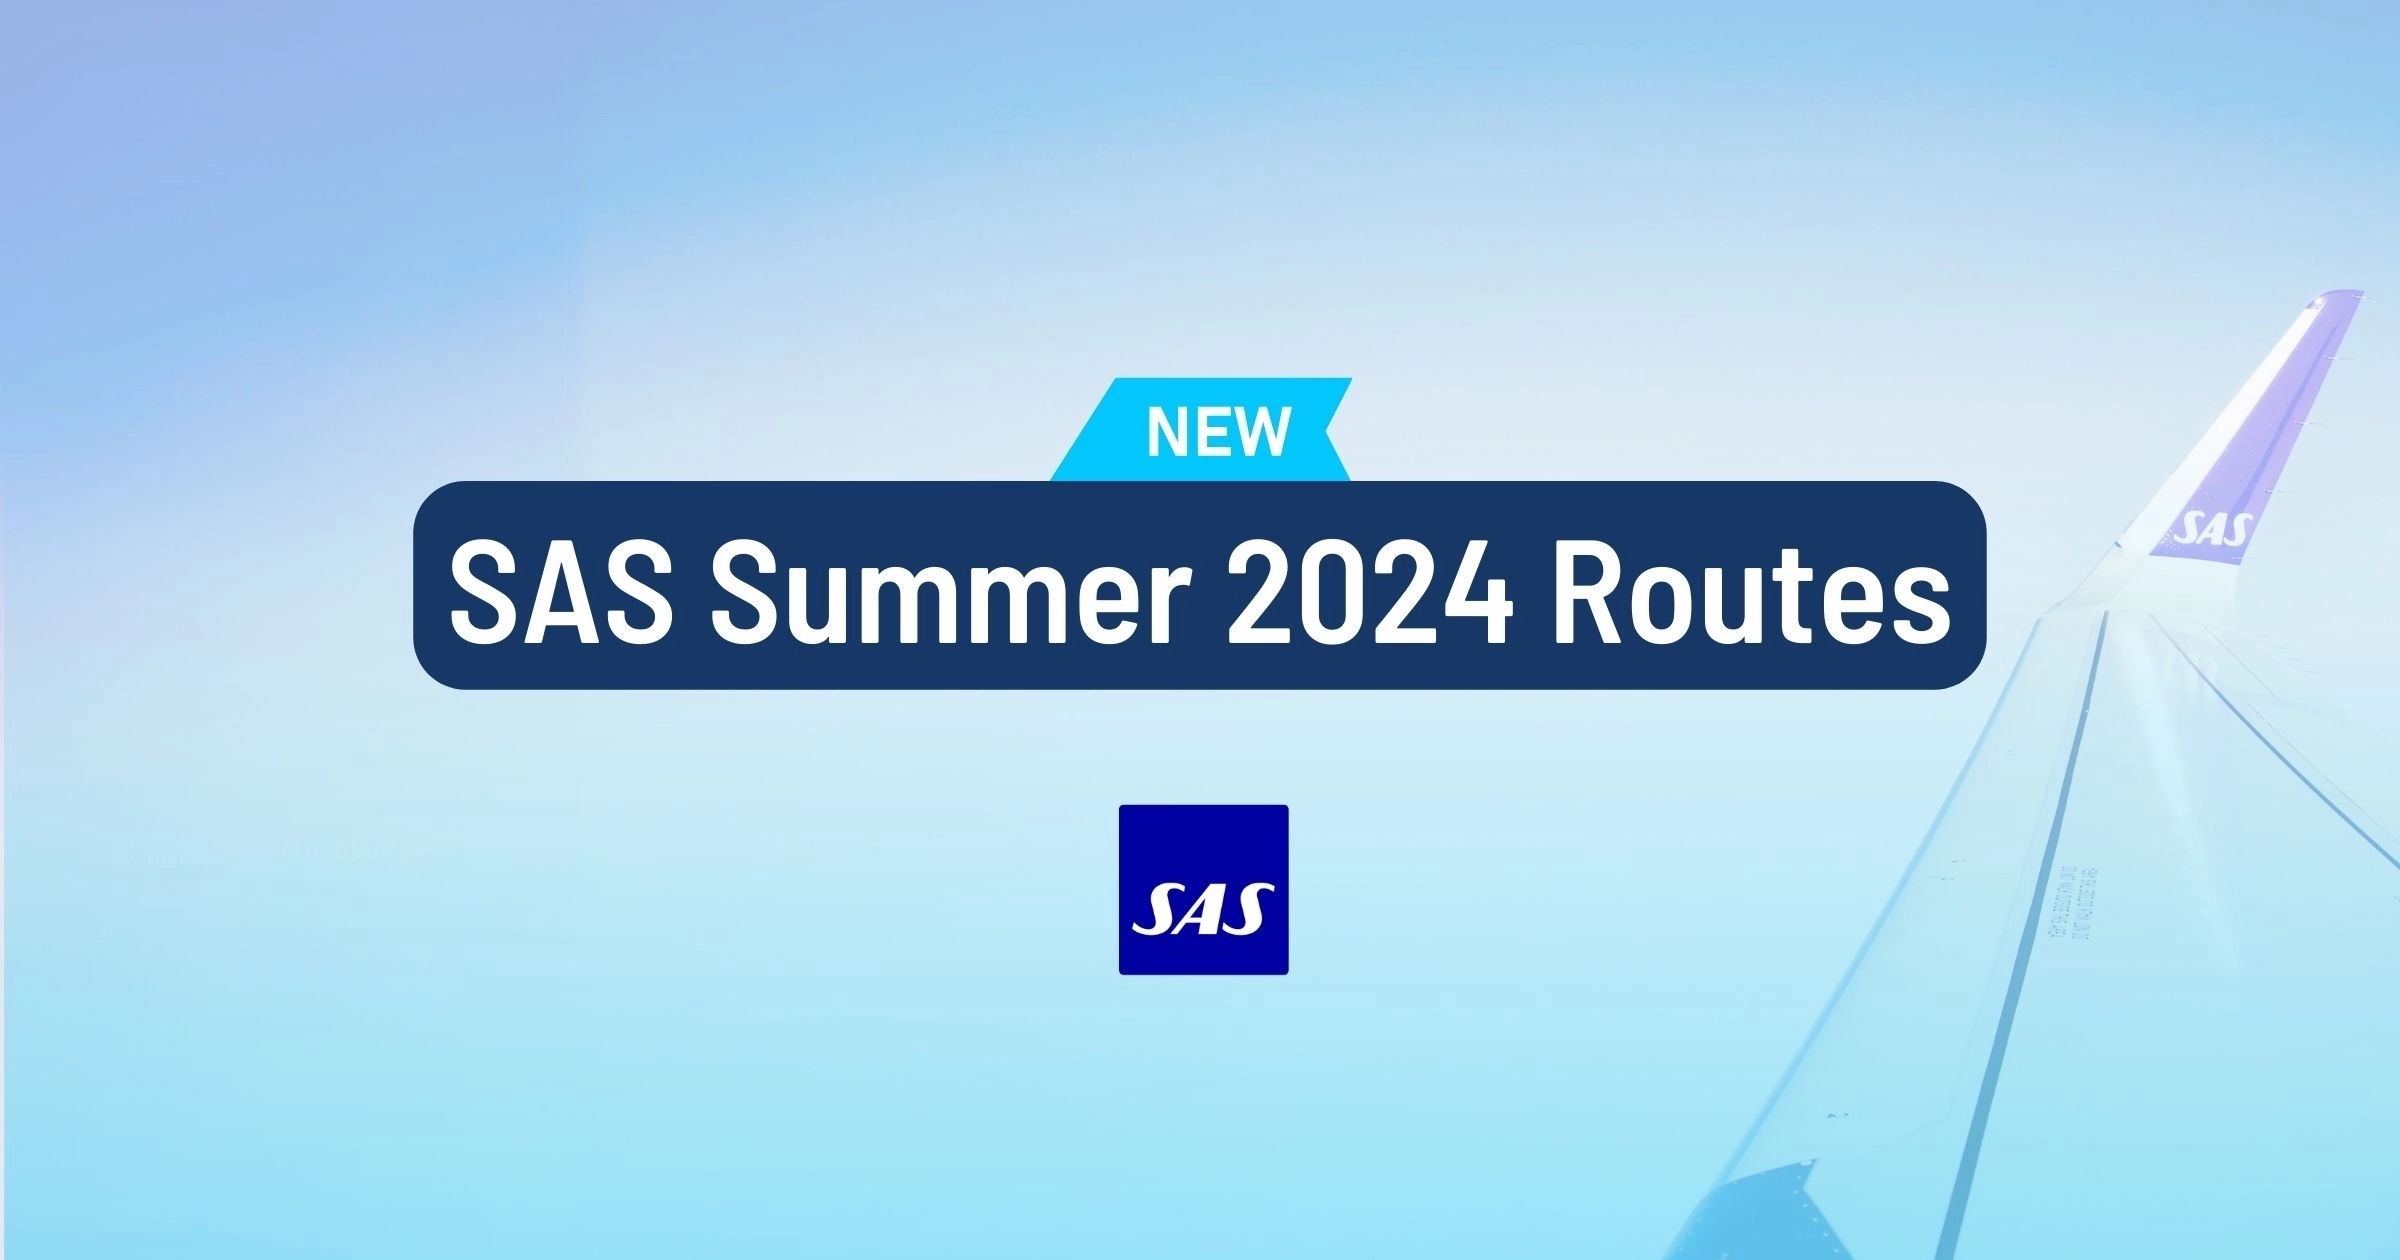 Cover image for SAS Will Fly To 9 New Destinations During Summer 2024